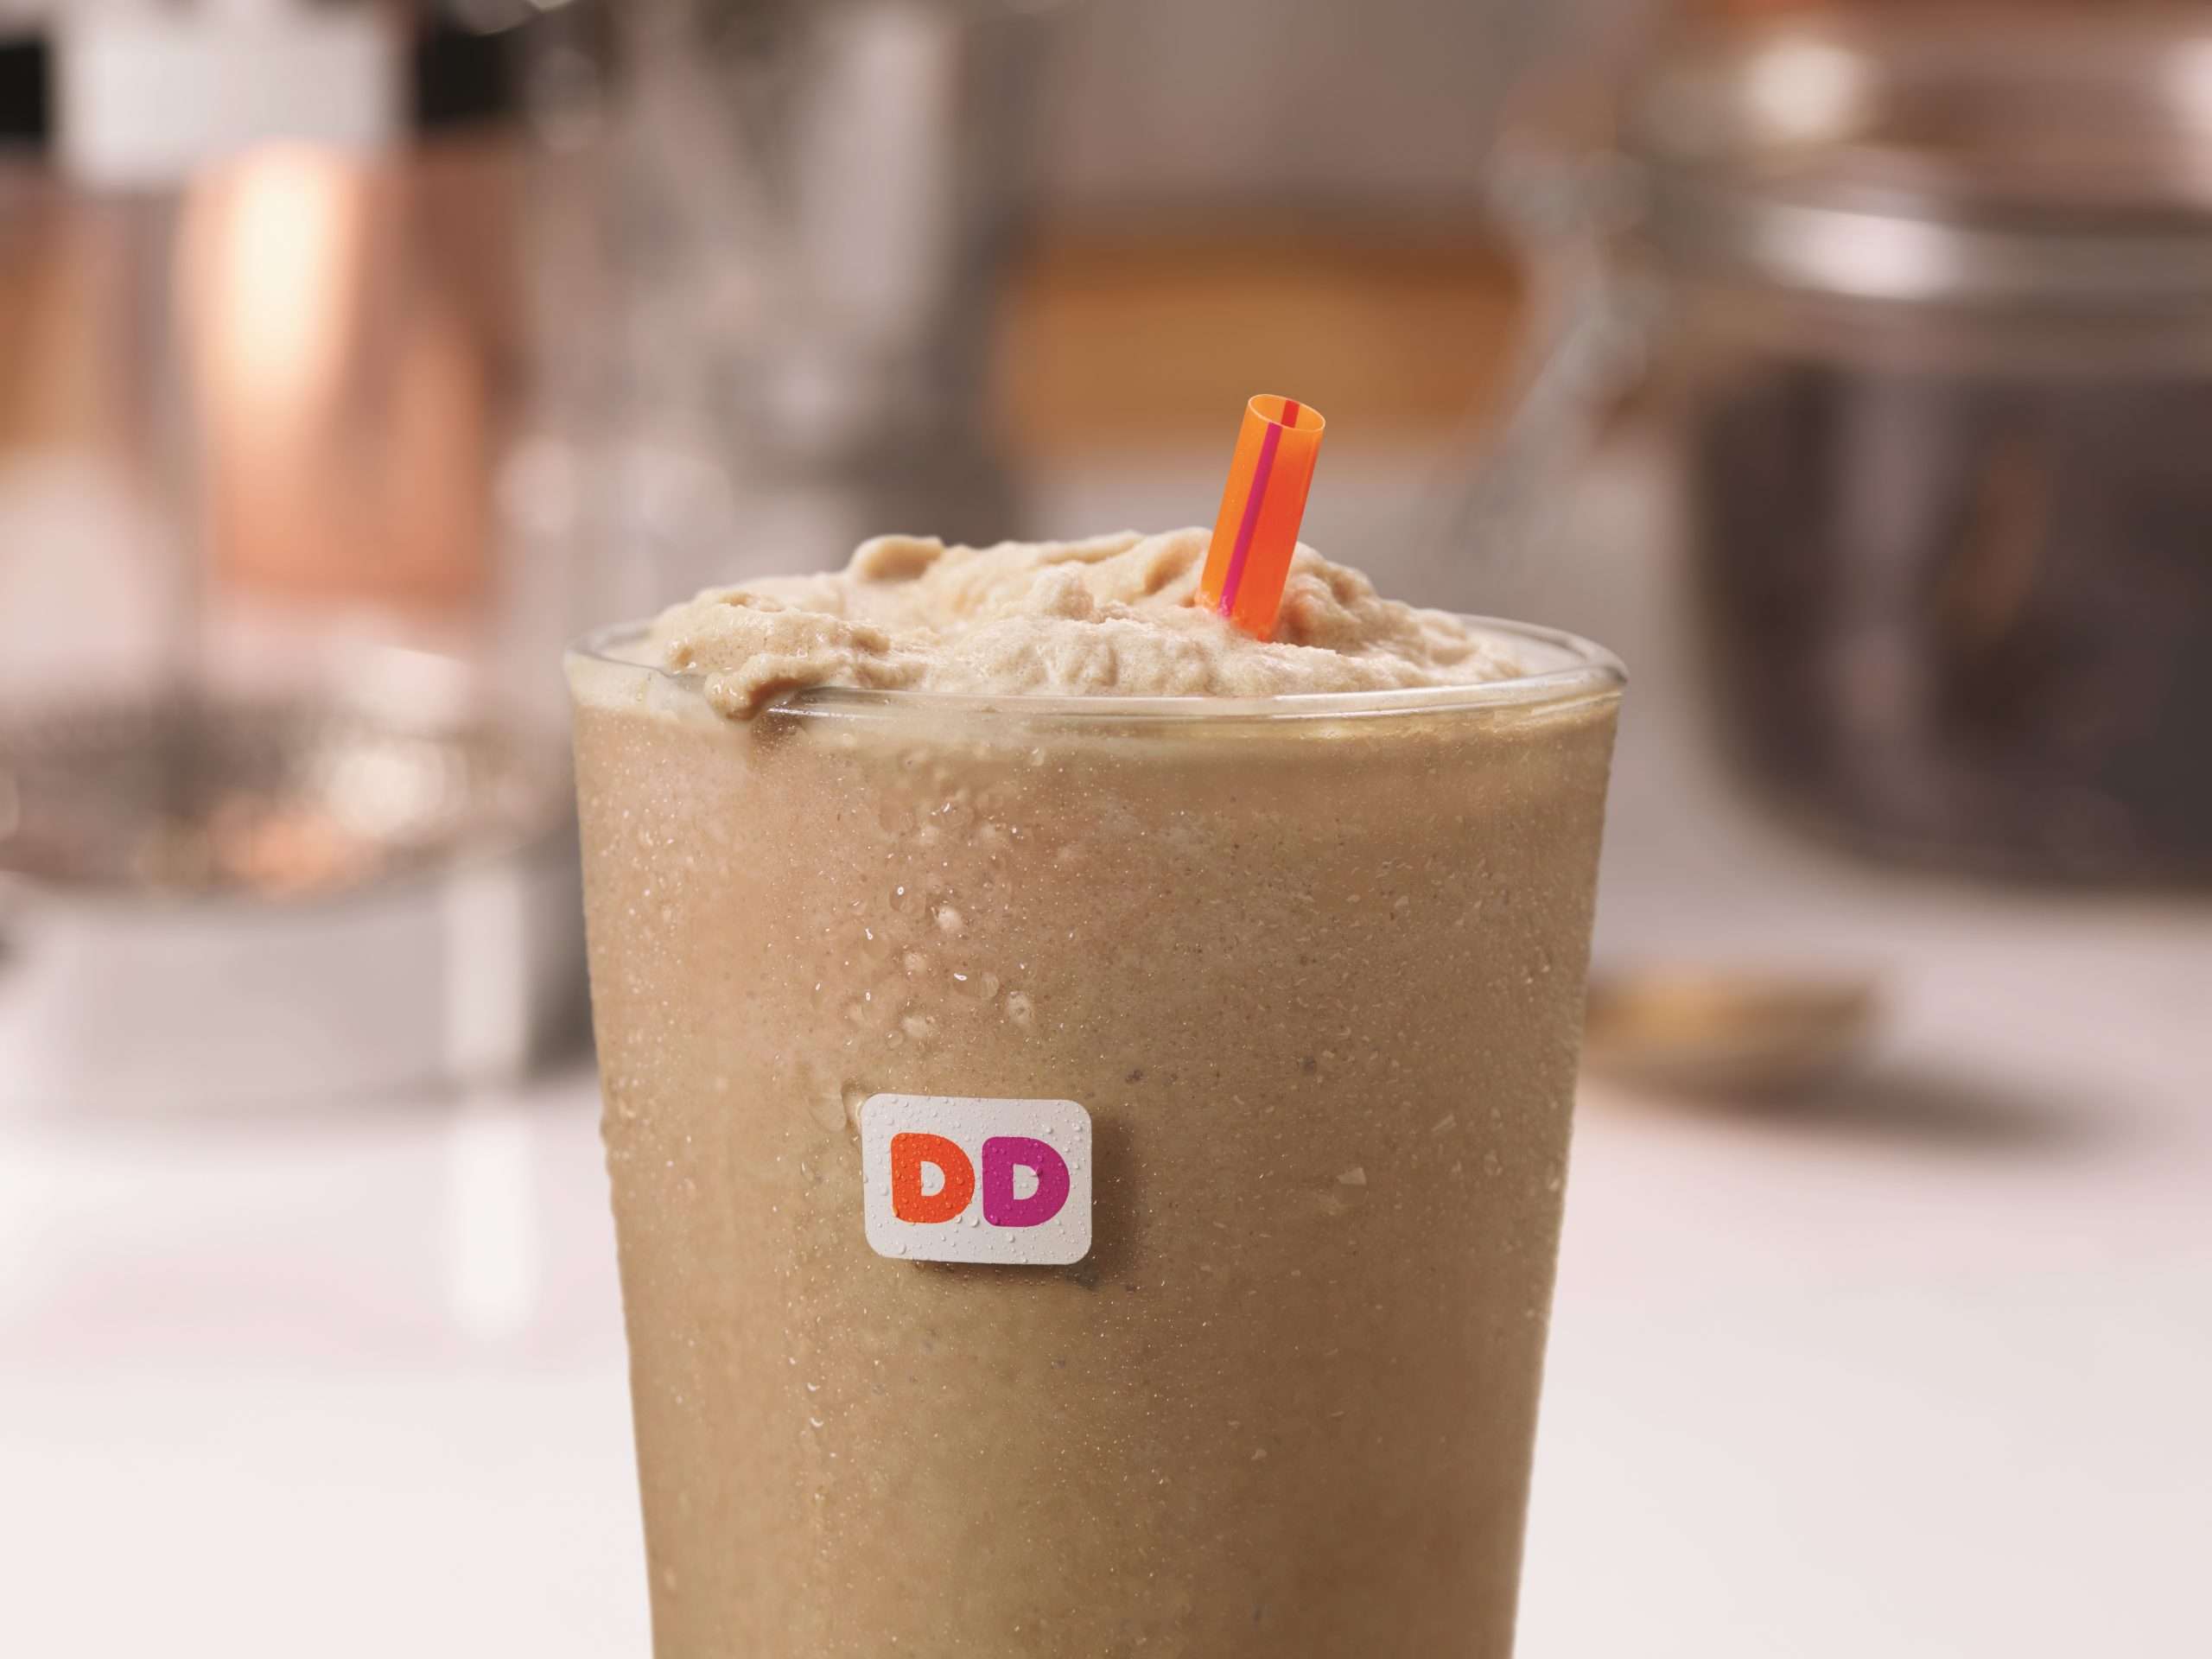 Dunkin Donuts Expands Coffee Menu with New Frozen Dunkin Coffee